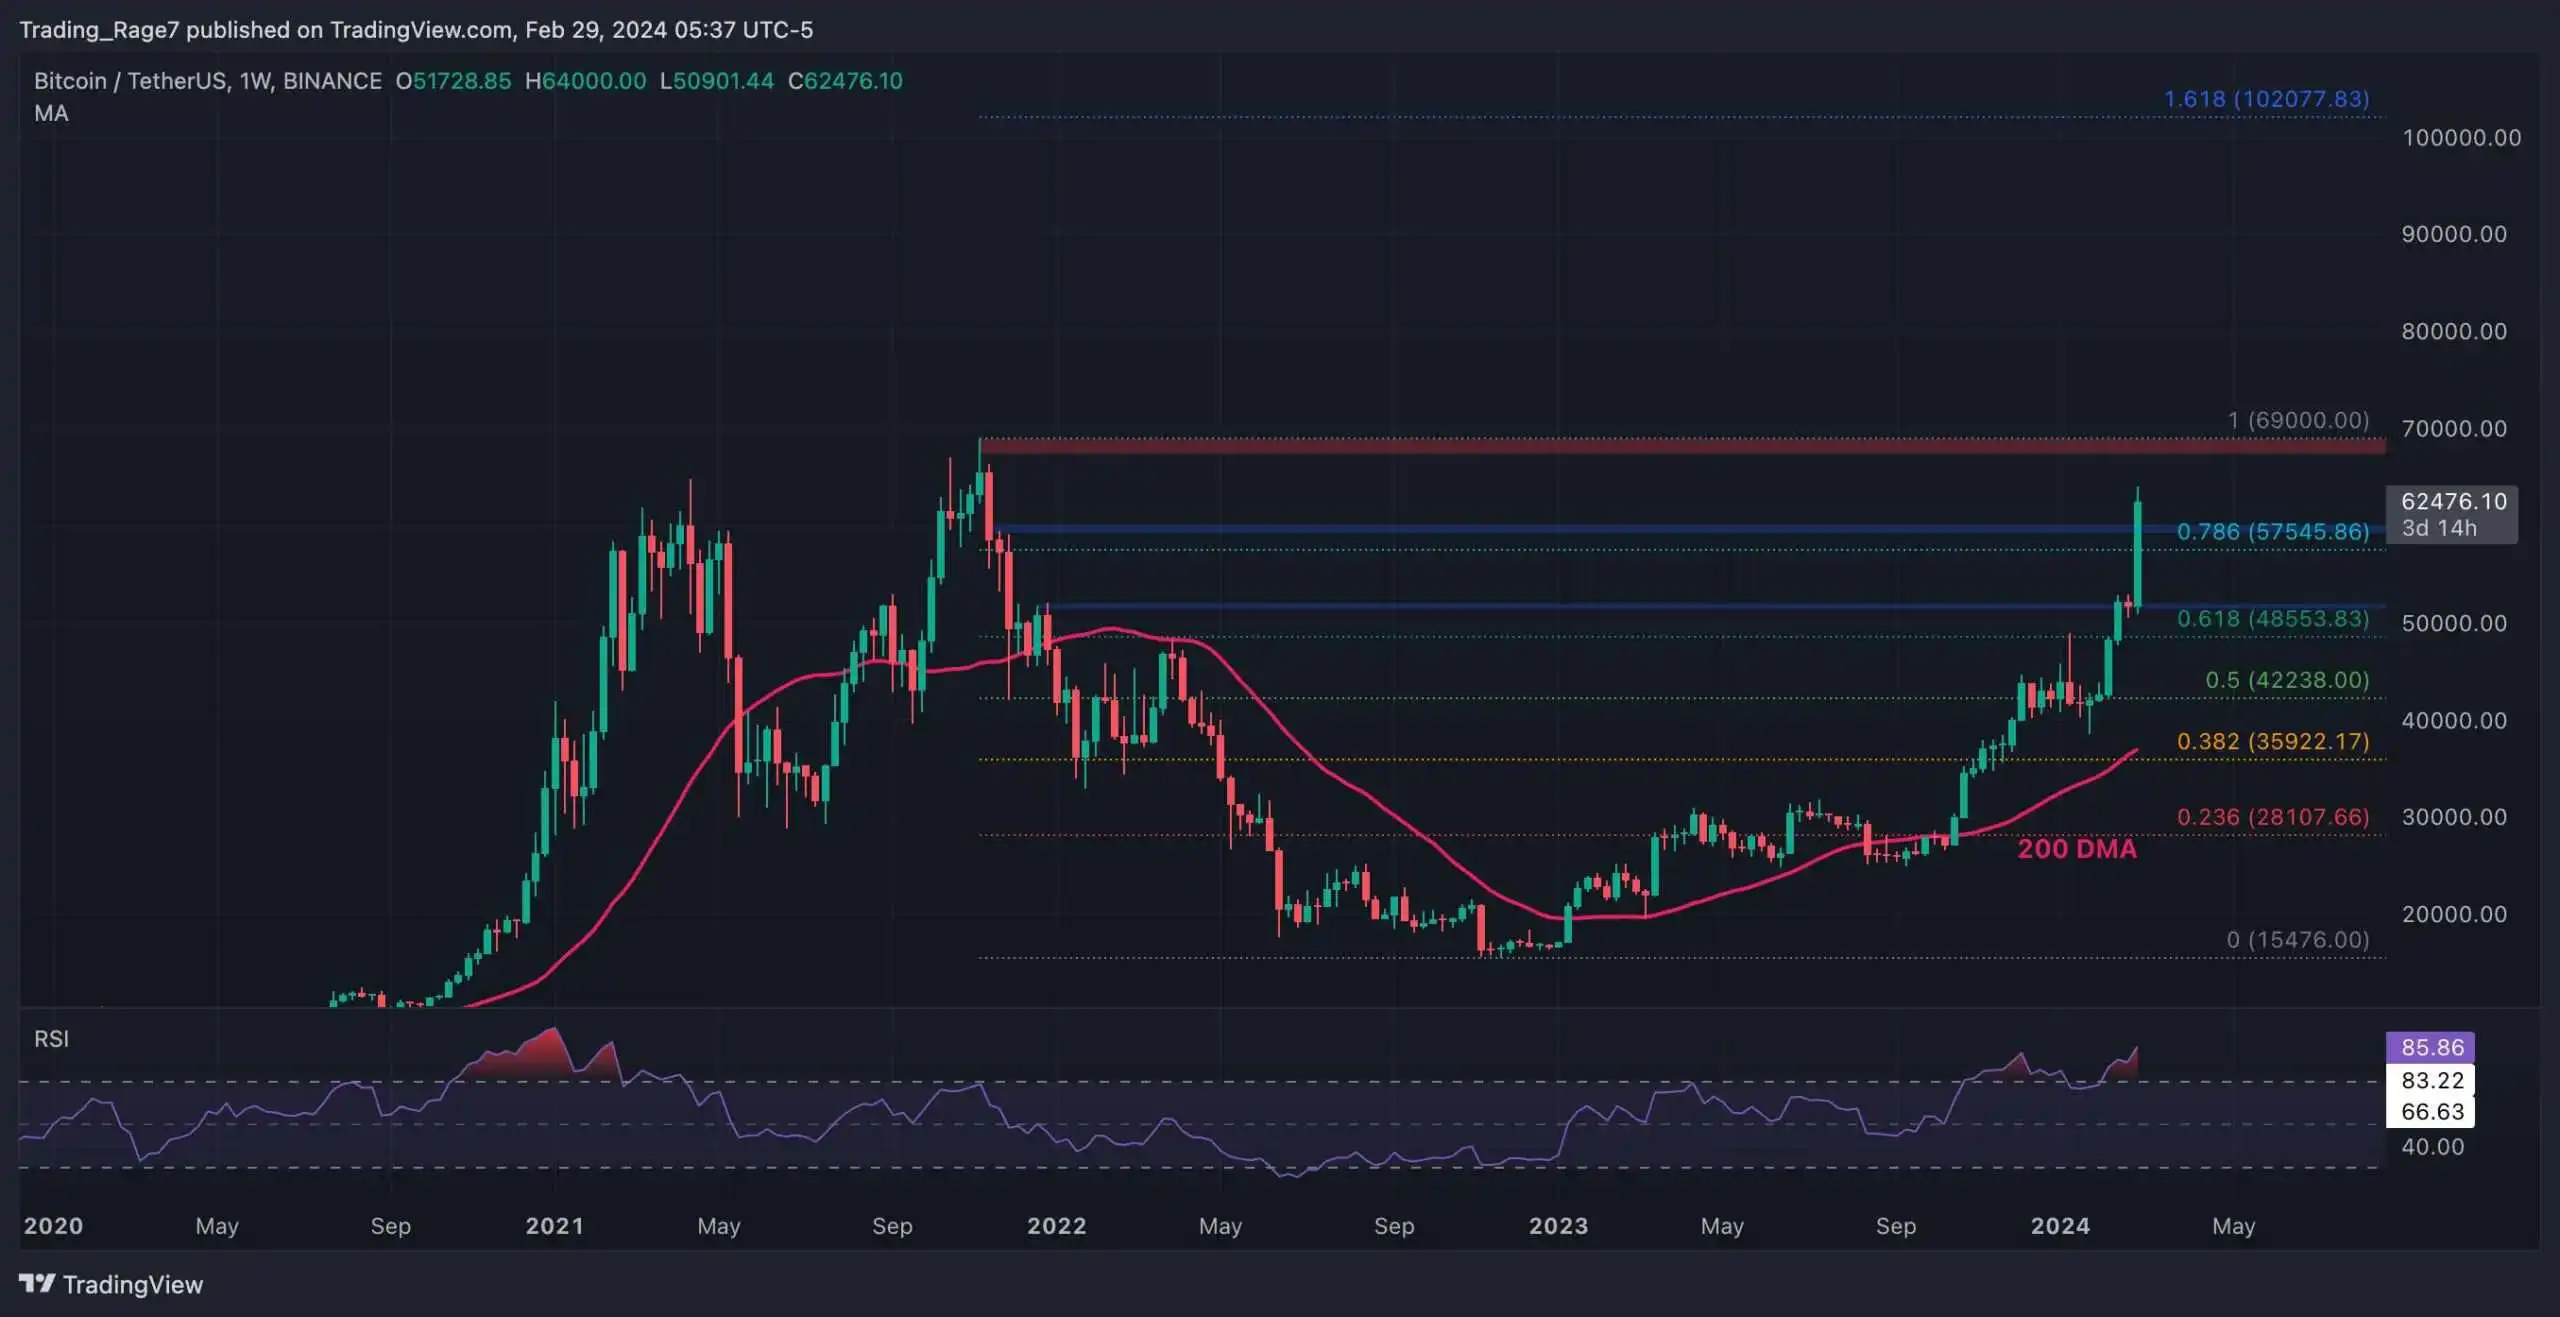 Bitcoin Price Analysis: Approaching All-Time High of $69K